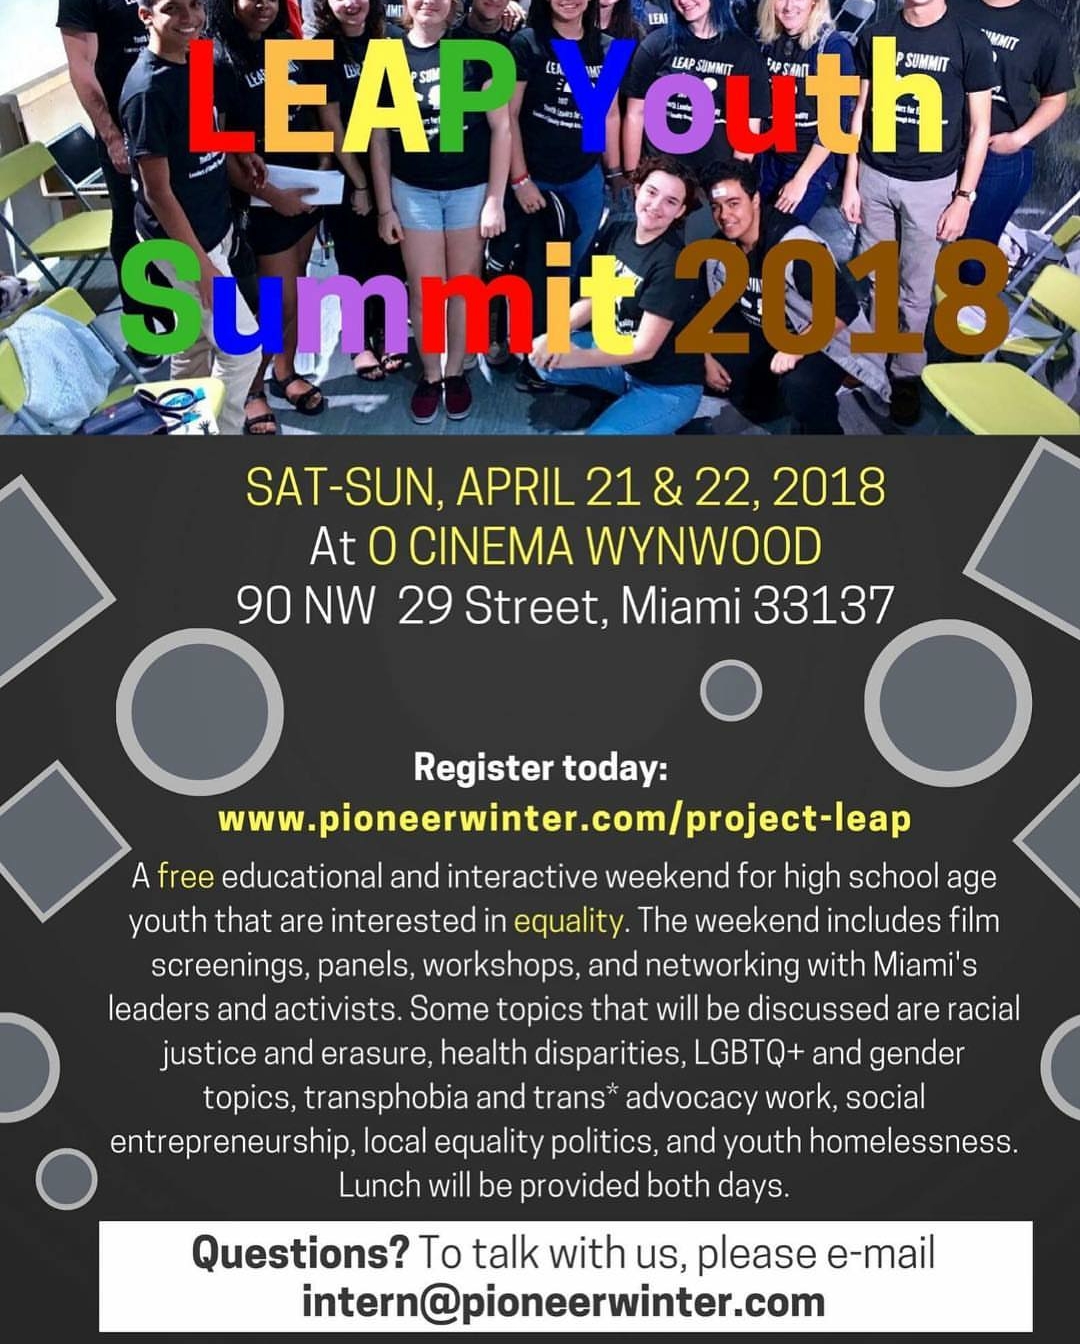 Leap Youth Summit 2018 - Join the Pioneer Winter Collective for Leaders of Equality Through Arts and Performance(LEAP), the Collective's queer youth arts initiative. LEAP is a free weekend summit for LGBTQIA+ high schoolers. This Summit will include film screenings, workshops, panels, and networking with Miami's activists and leaders. During these two days, topics such as racial justice, local equality politics, health disparities, and youth homelessness will be discussed. Participants will receive community service hours, free lunch and snacks, as well as the opportunity to grow as leaders.    This 2nd Annual Summit will take place Saturday, April 21 and Sunday, April 22, 2018 at O Cinema Wynwood. Both days begin promptly at 10:00 am and end at 5:00 pm. Participants are encouraged to arrive beginning at 9:30 am both days. Registration deadline is April 7, but we encourage you to register early to ensure your spot!